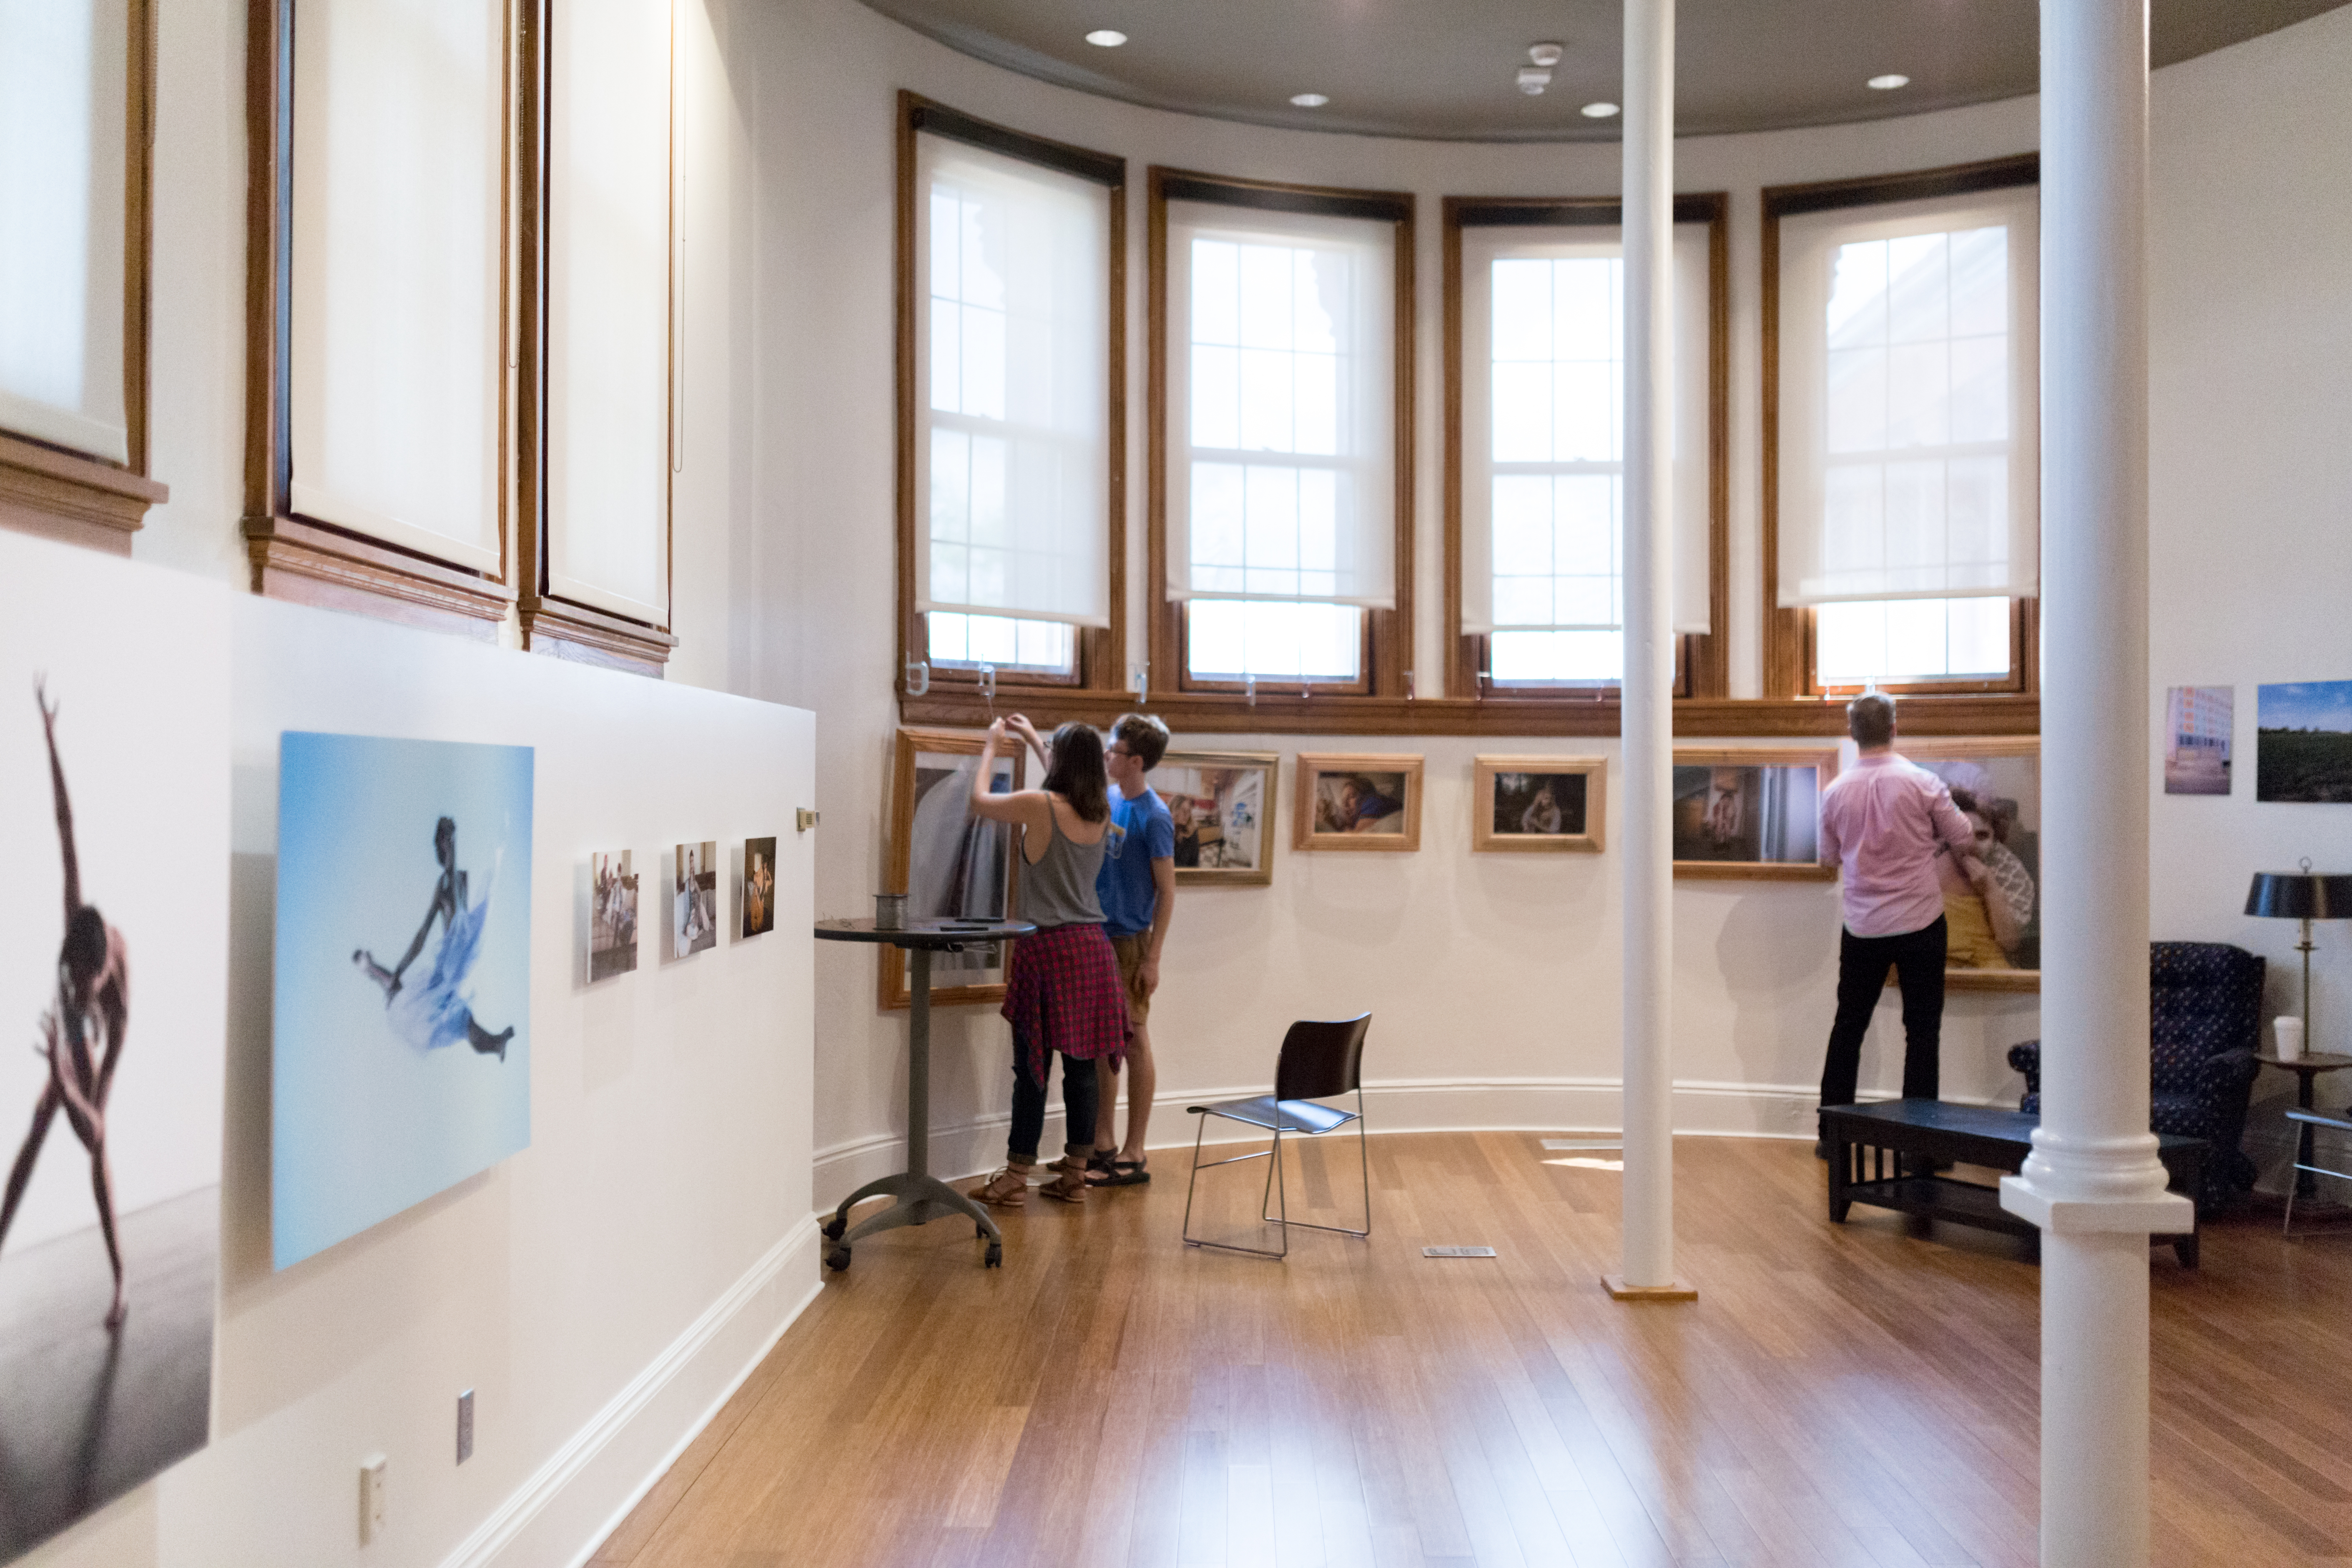 Students mount an exhibit of photographs in the Commons area  